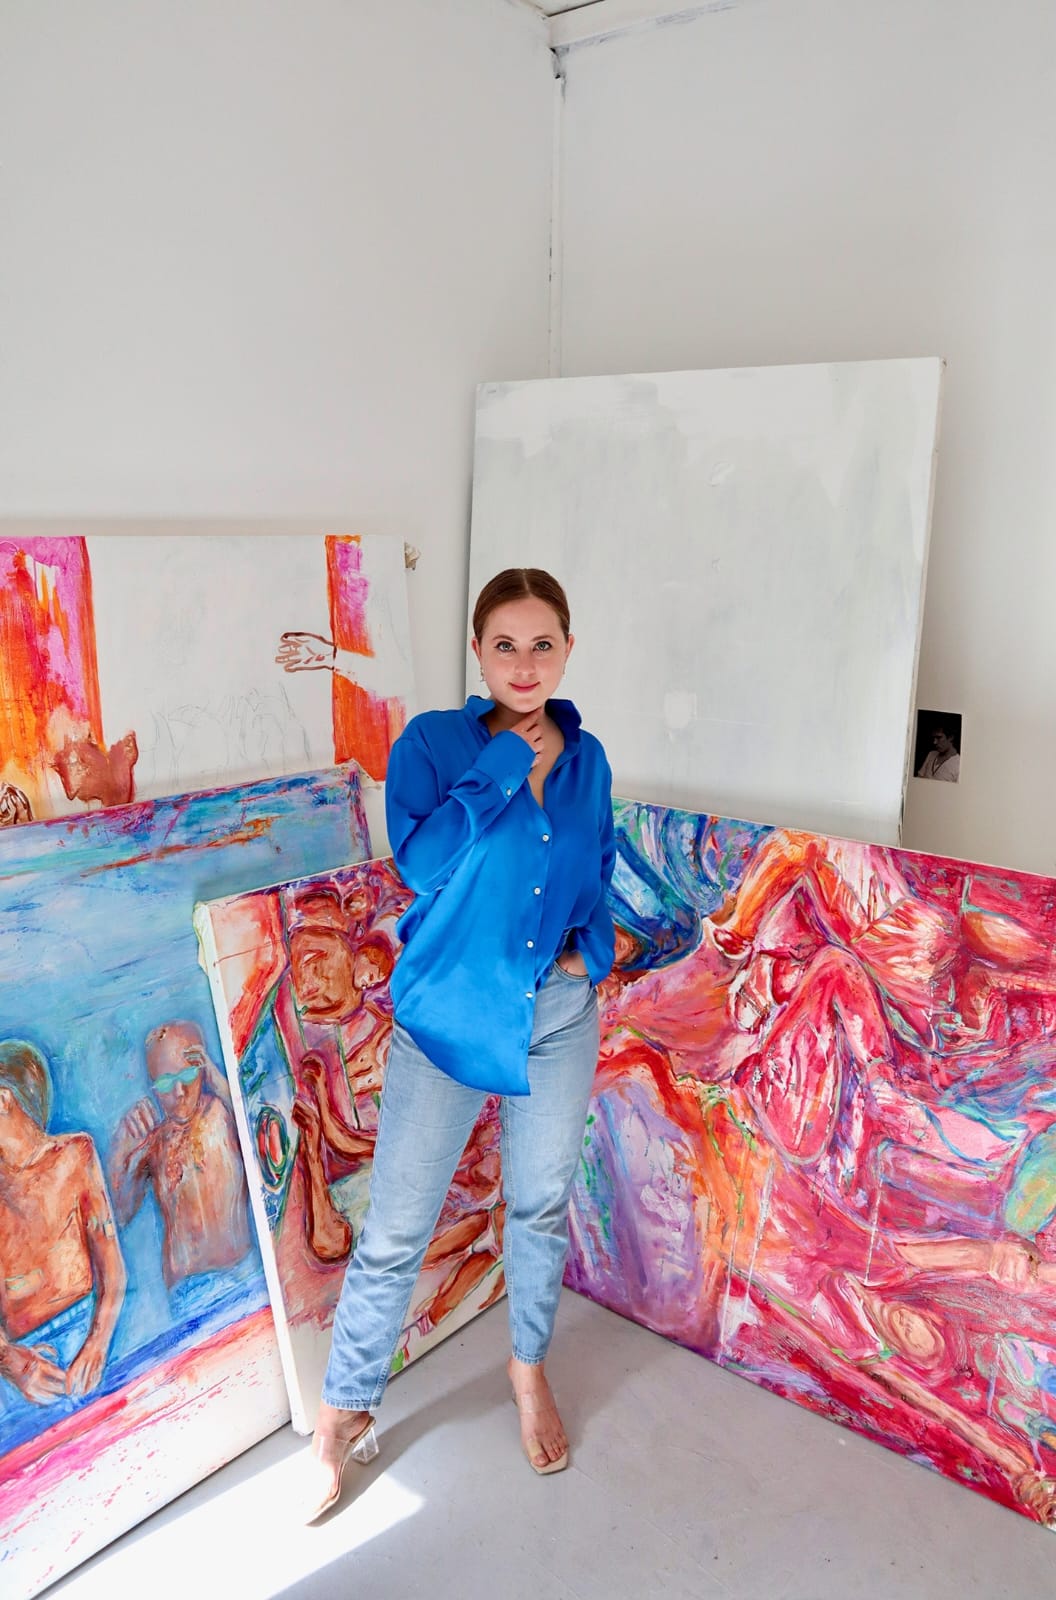 An image of a person in a blue shirt standing in front of some paintings in a studio.